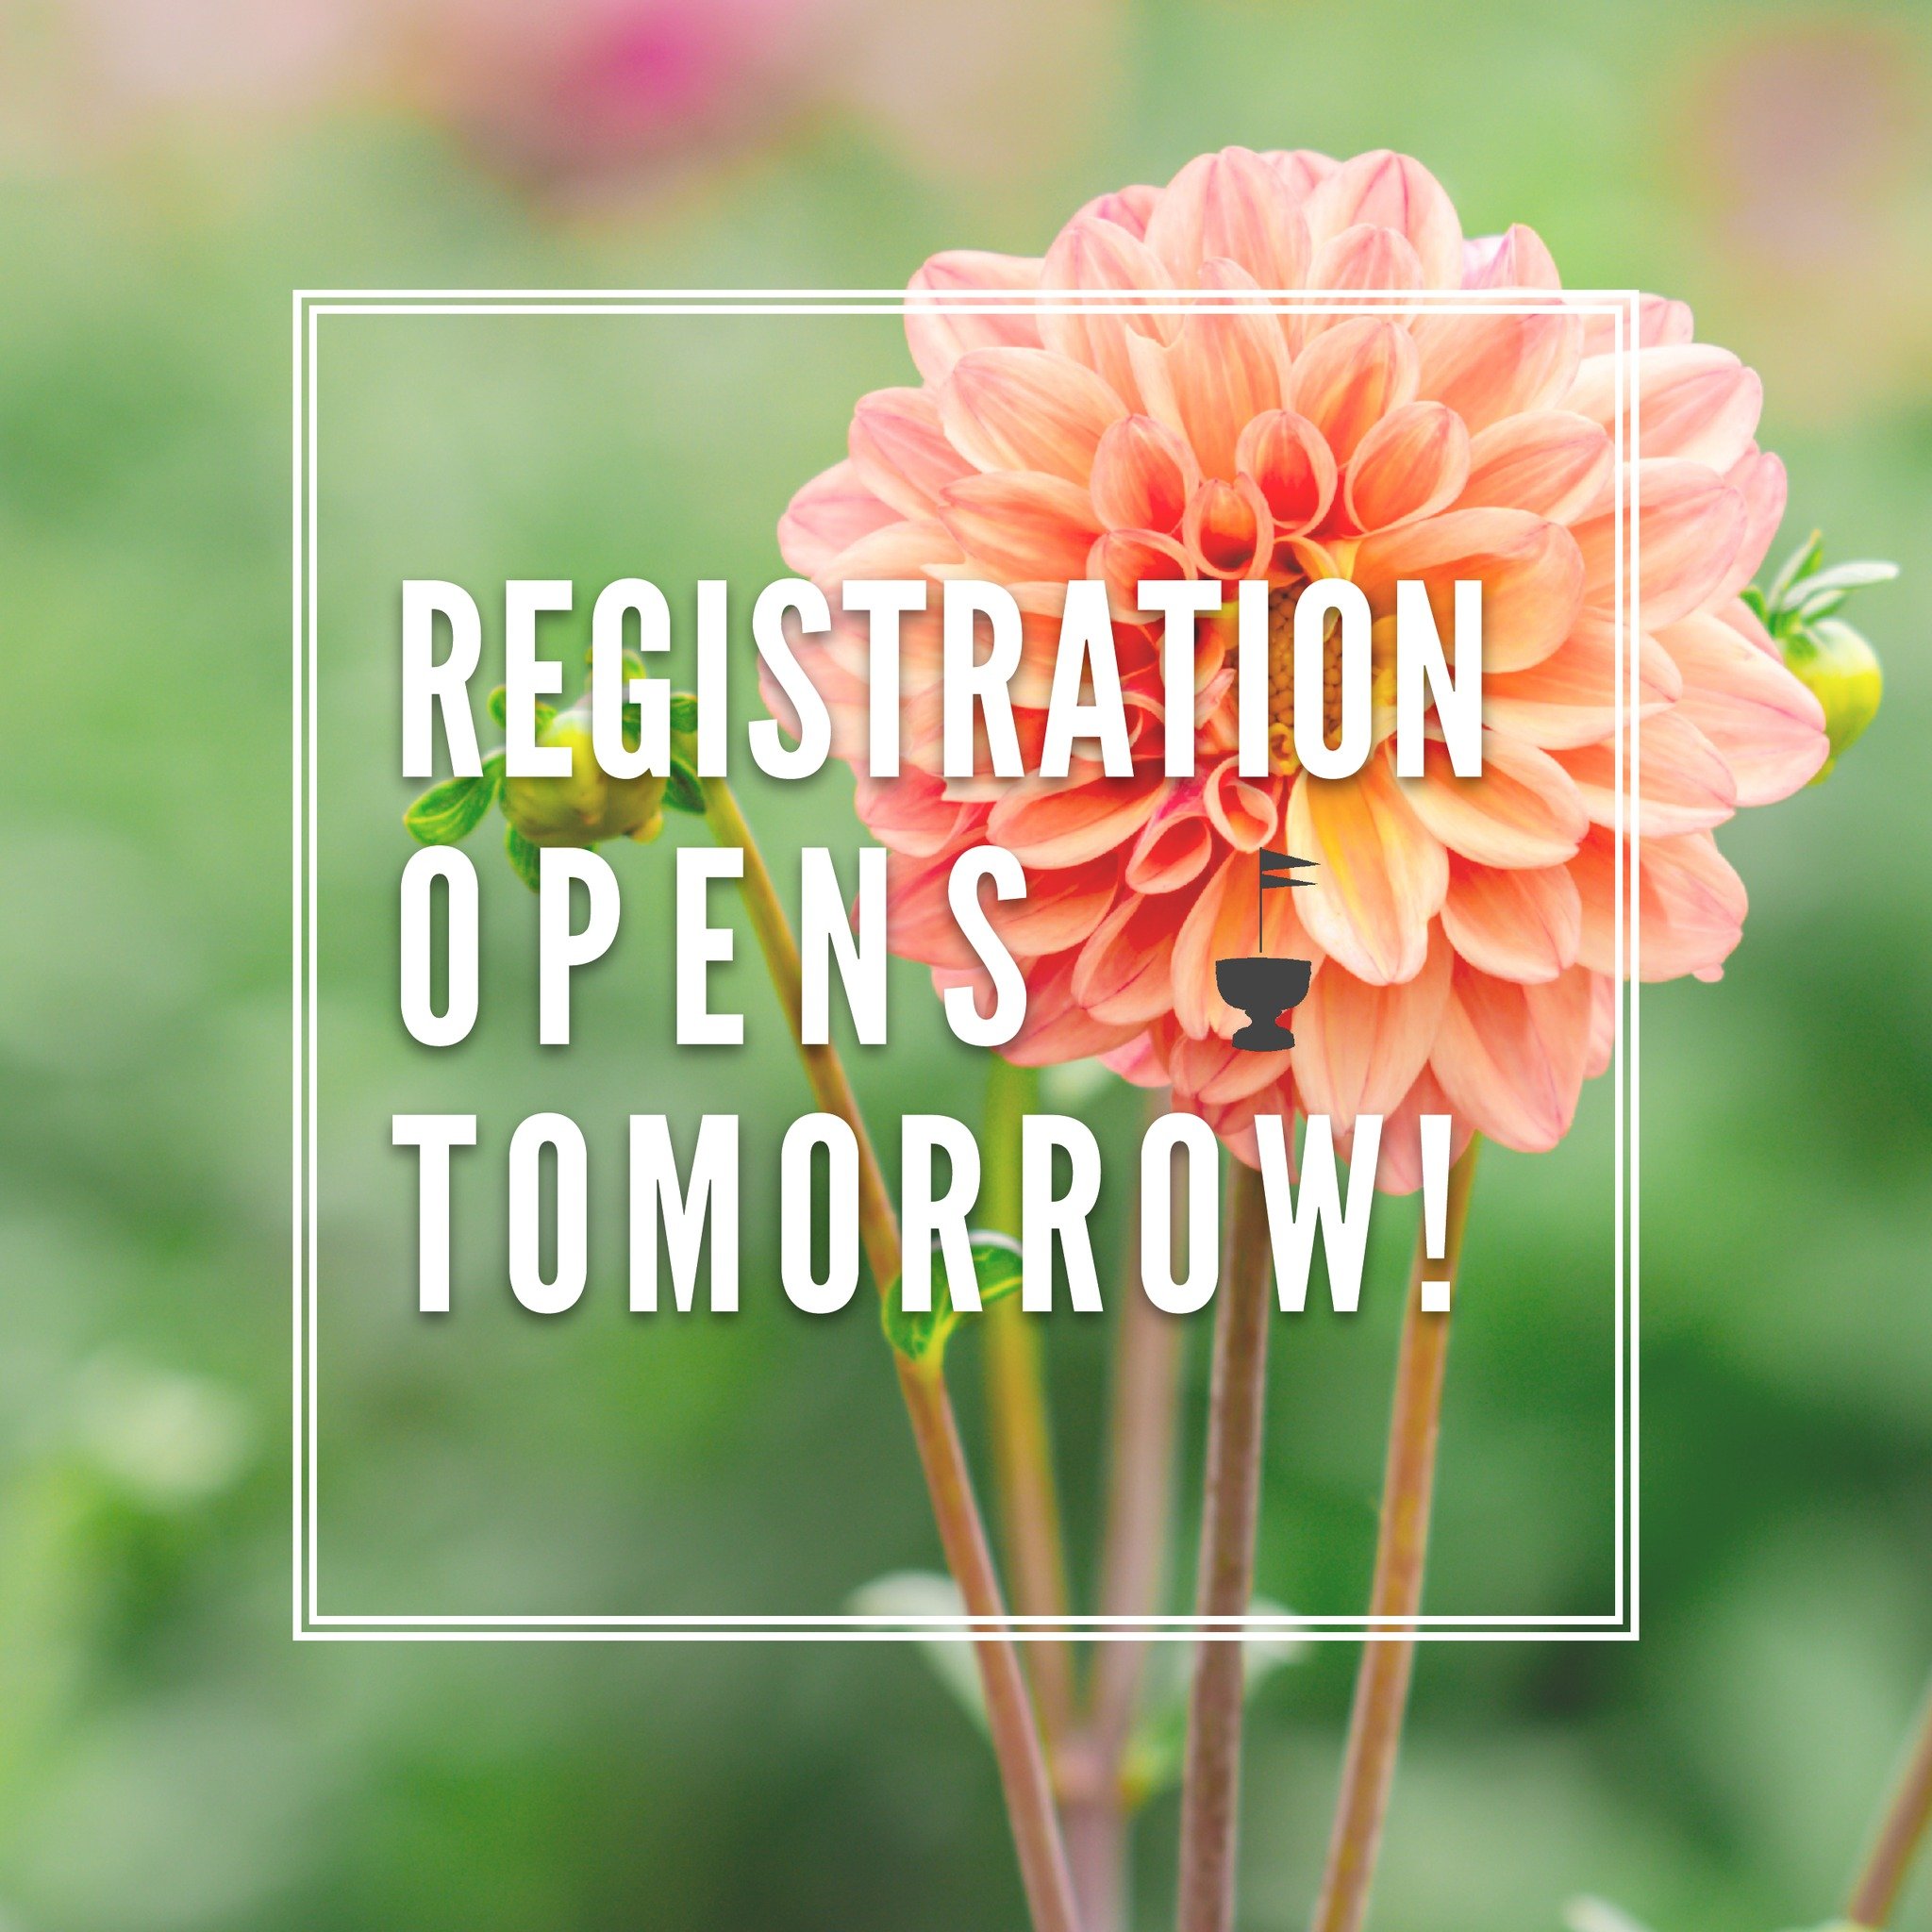 🌿 Dive into the beauty of blossoms! 🌸 Registration for Nantucket Garden Festival ticket sales opens TOMORROW! 🎟️✨ Secure your spot in this floral paradise! 

#NantucketGardenFestival #Nantucket #NantucketIsland #ACK #NGF 

@finegardening
@necoasta